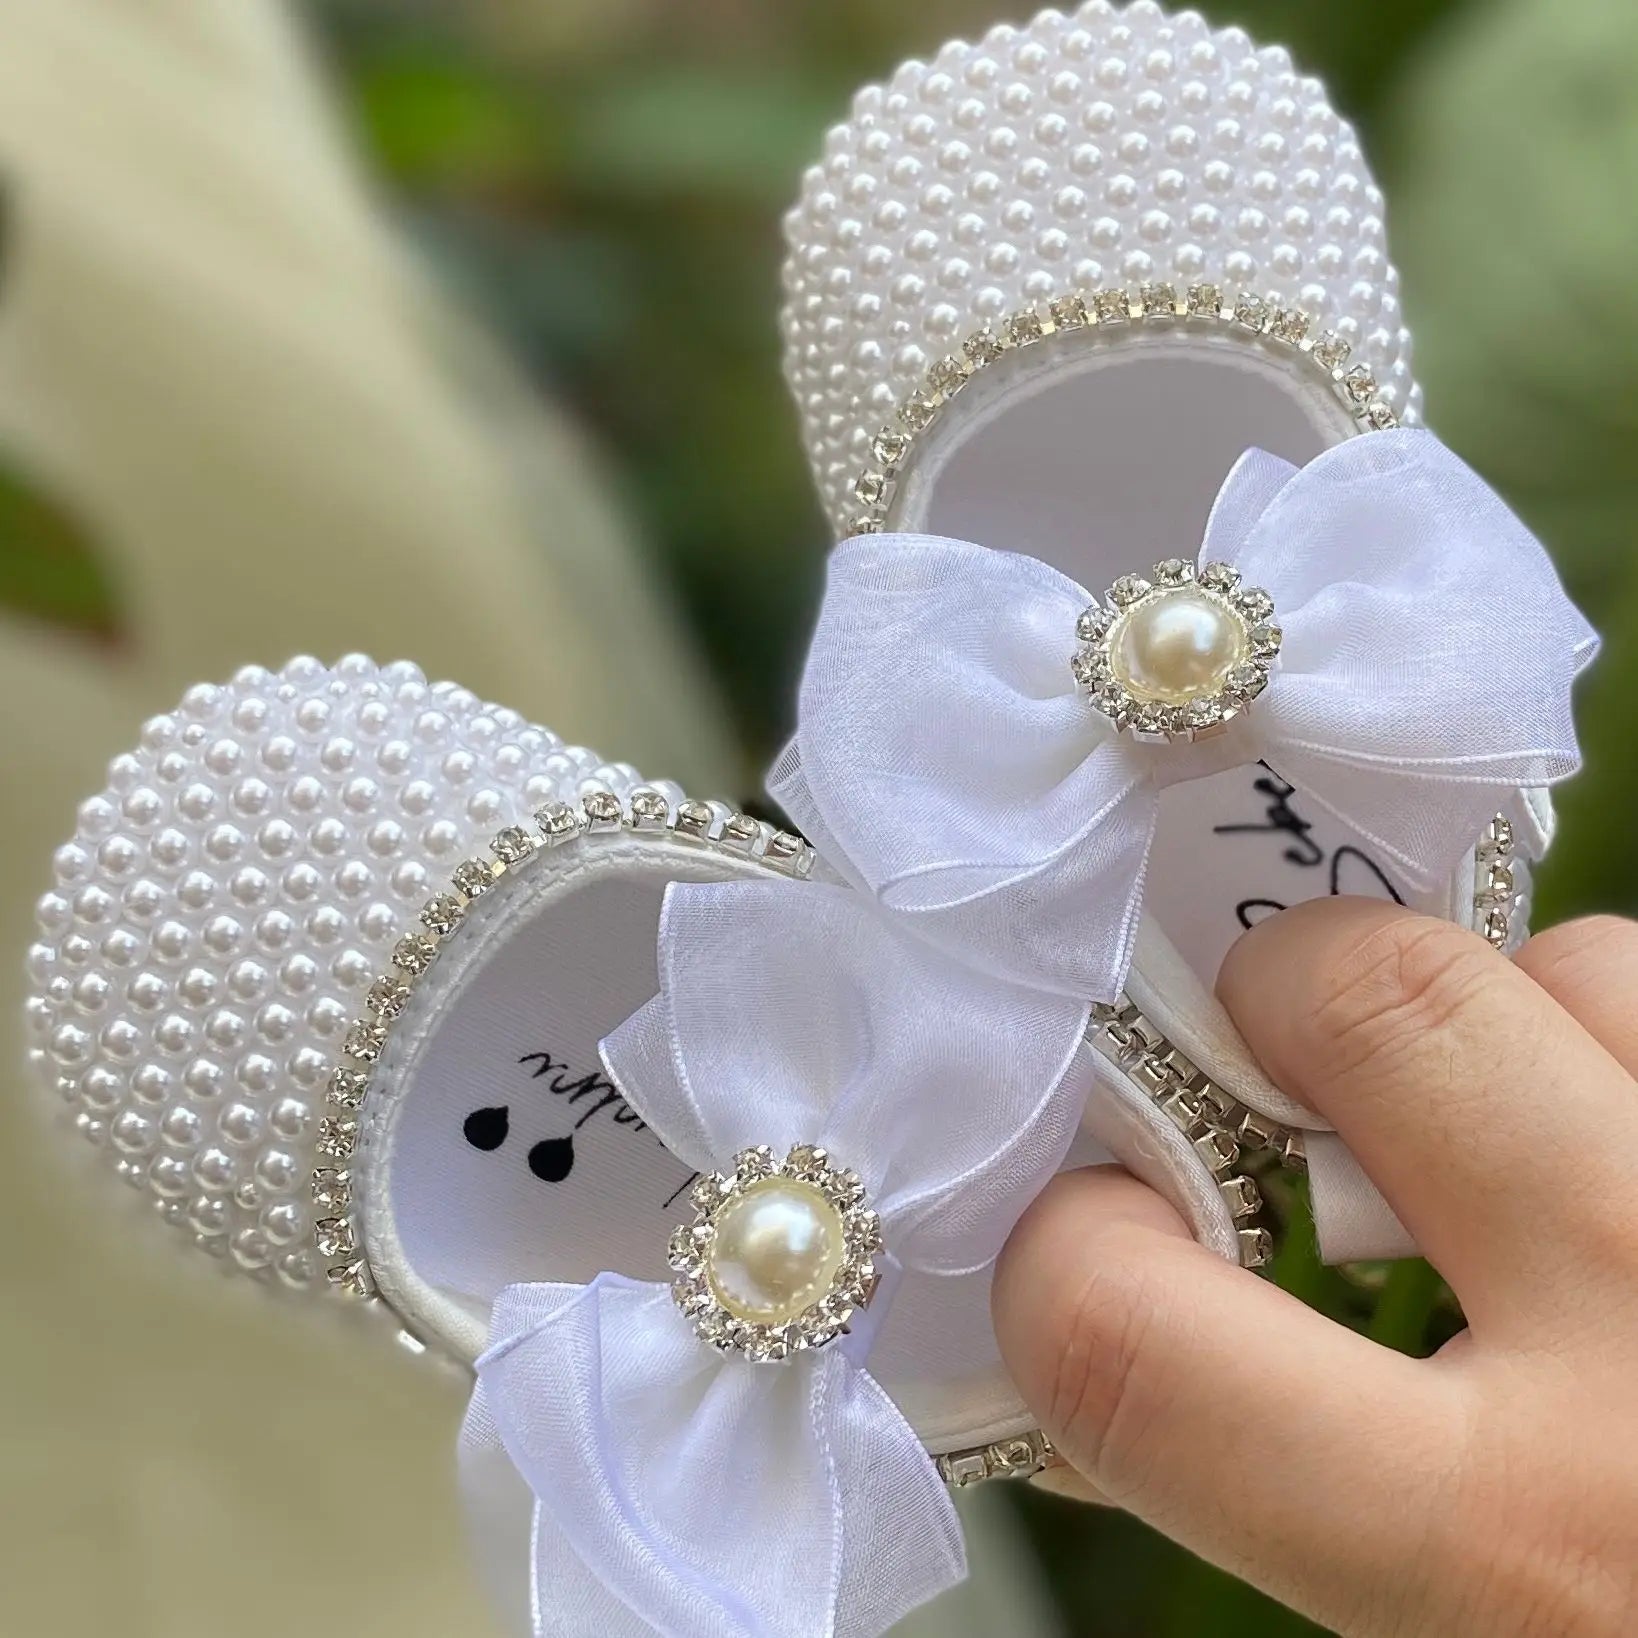 Handmade White Pearls Bling Rhinestone Baby Crib Shoes Christening Outfit Wedding Sparkle Organza Baptism 0-3m Shoes